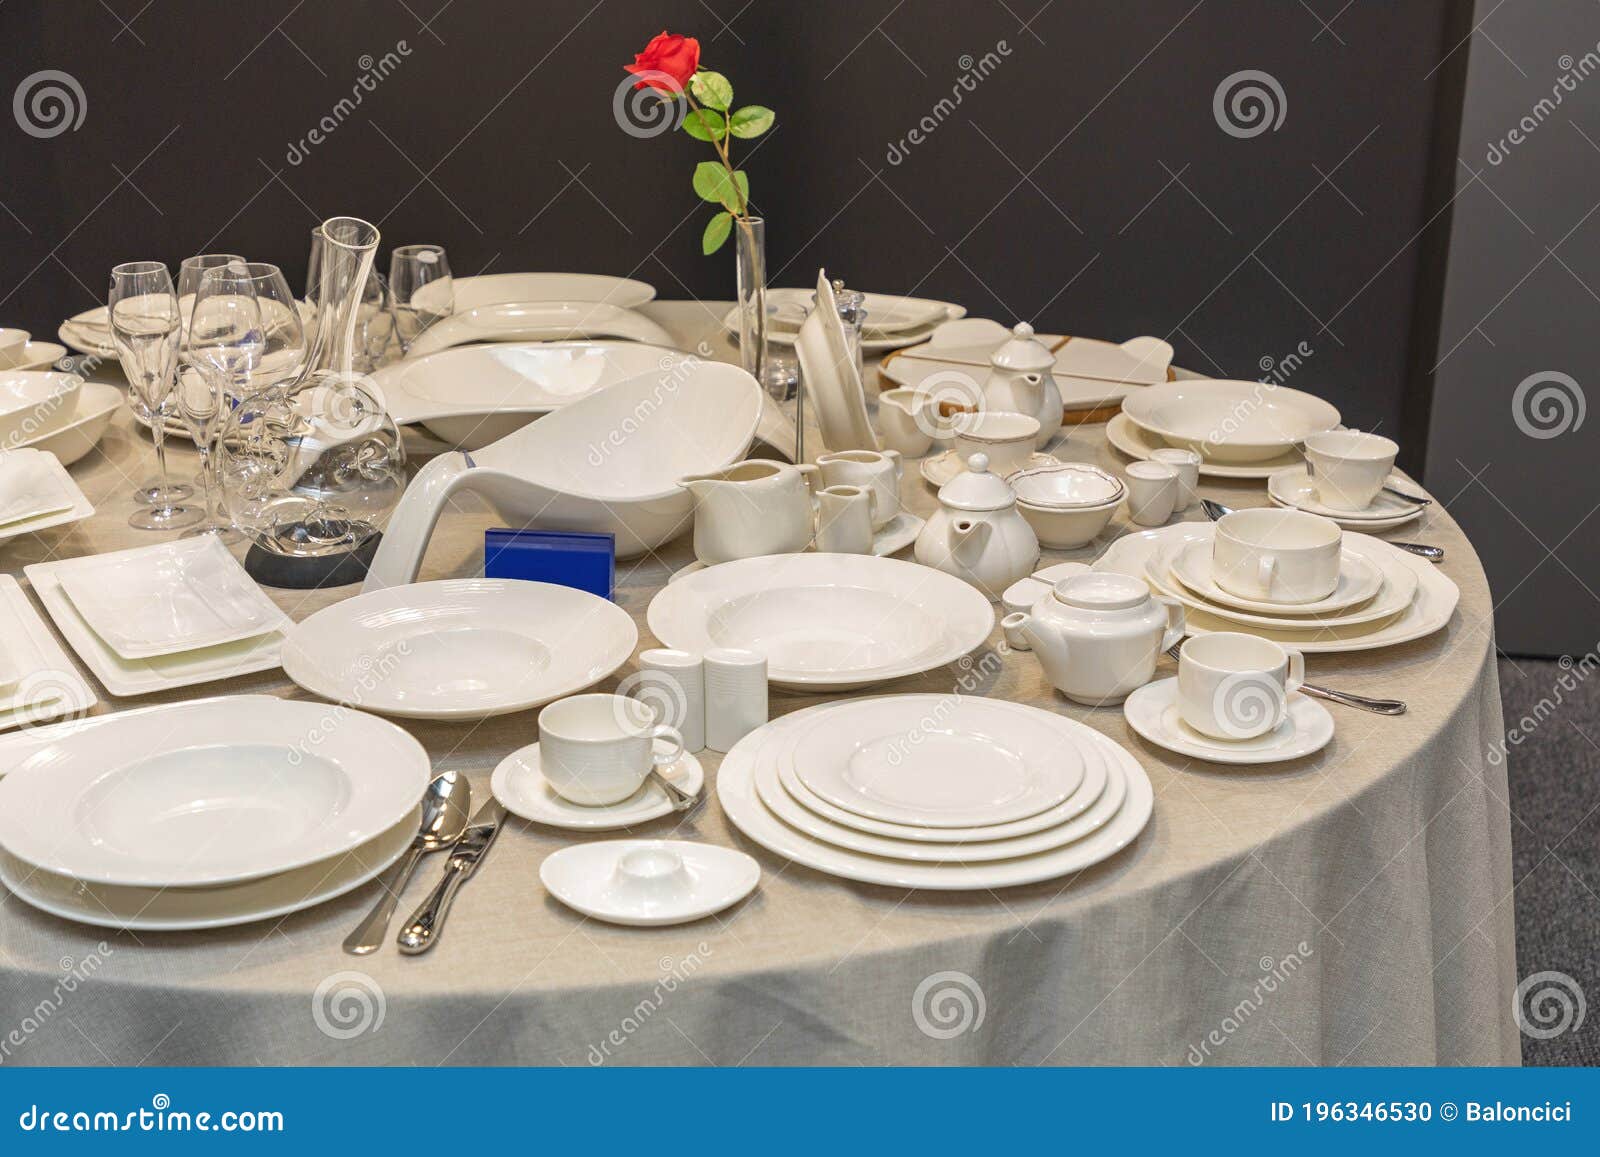 Ceramic Plates Table stock photo. Image of plate, dining - 196346530